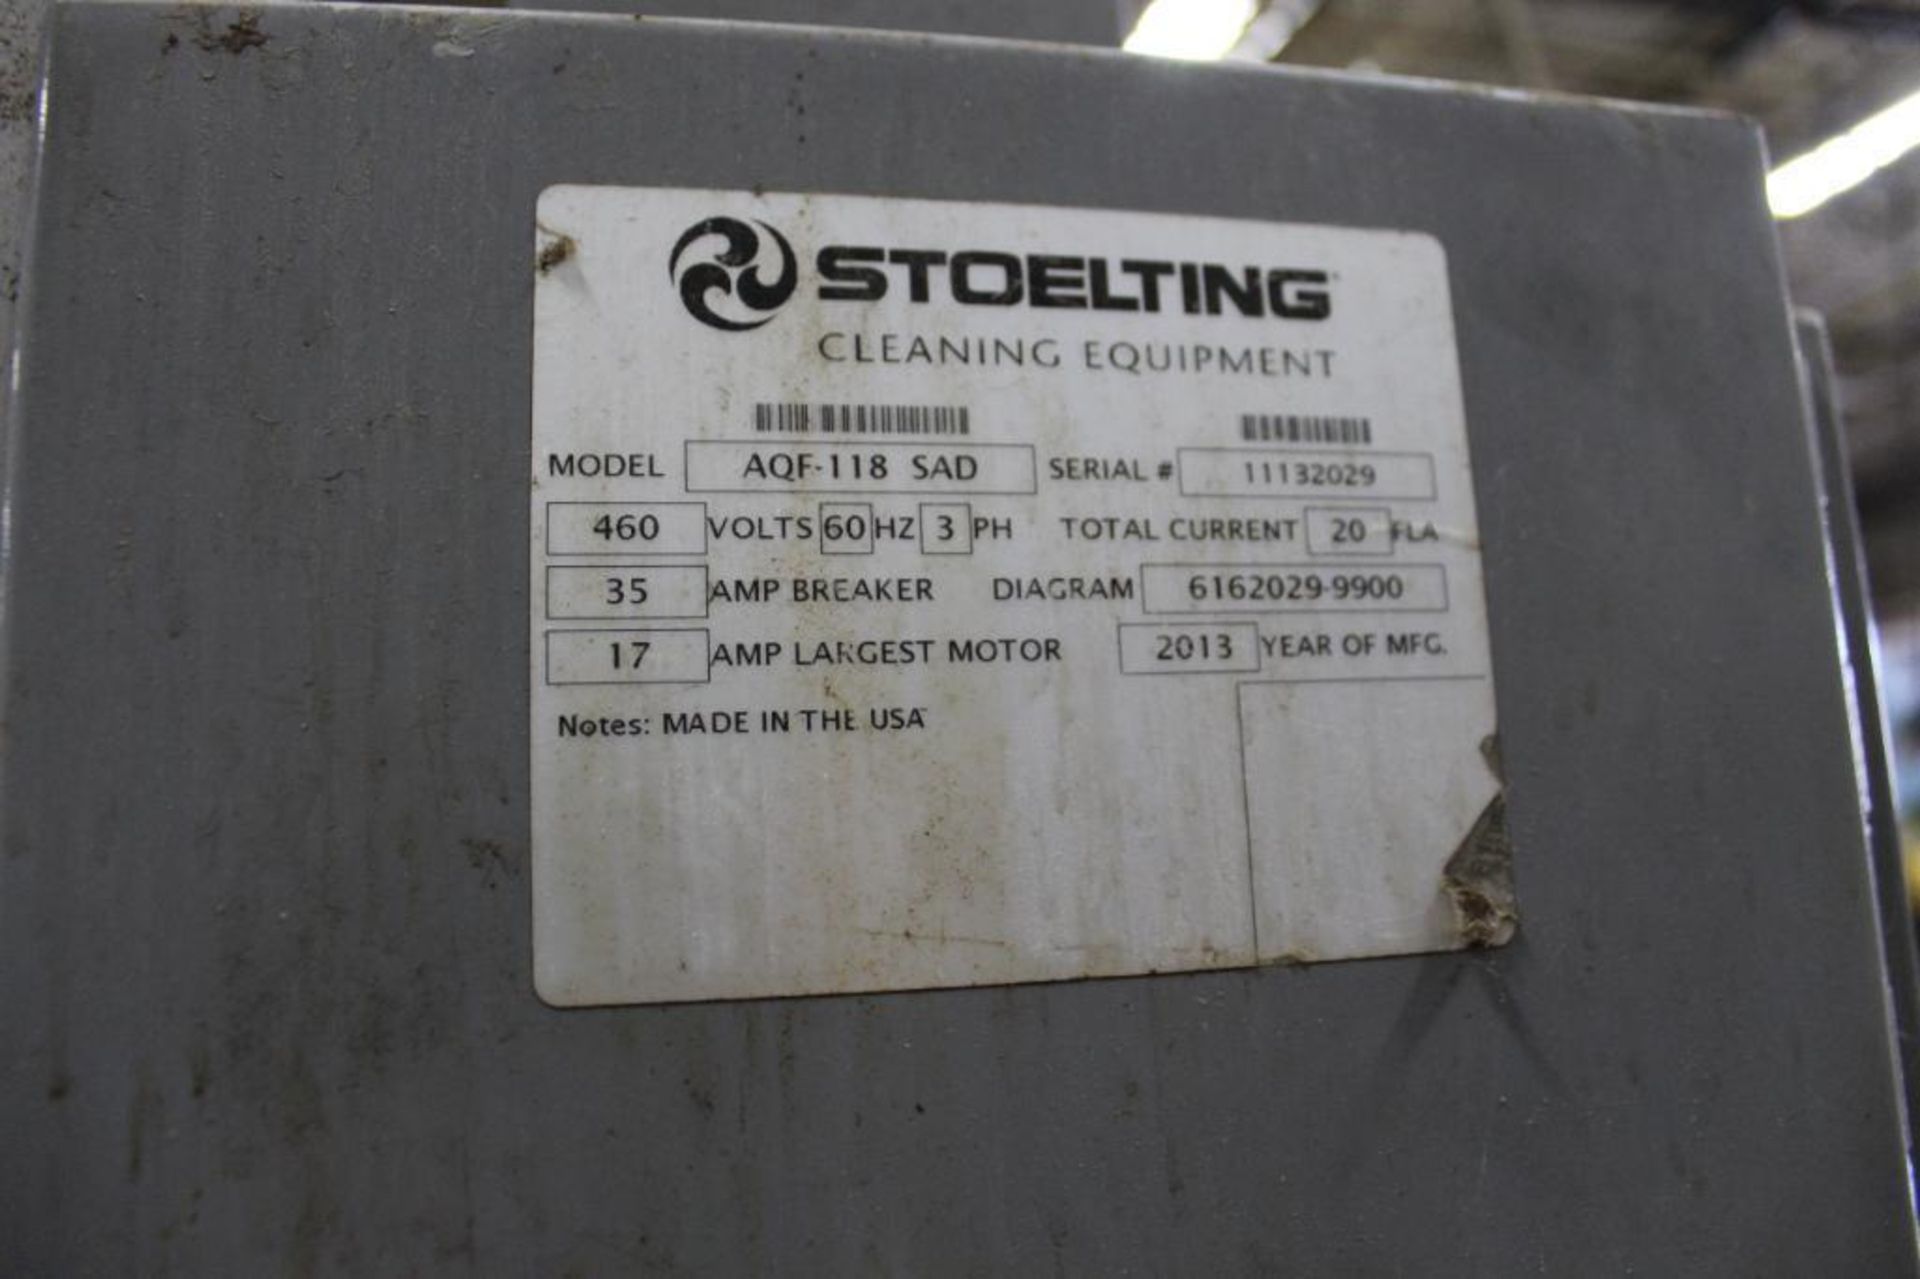 2013 Stoelting Model: AQF-118 Aquaforce 3-Stage Stainless Steel Conveyor Type Heated Dryer - Image 6 of 6